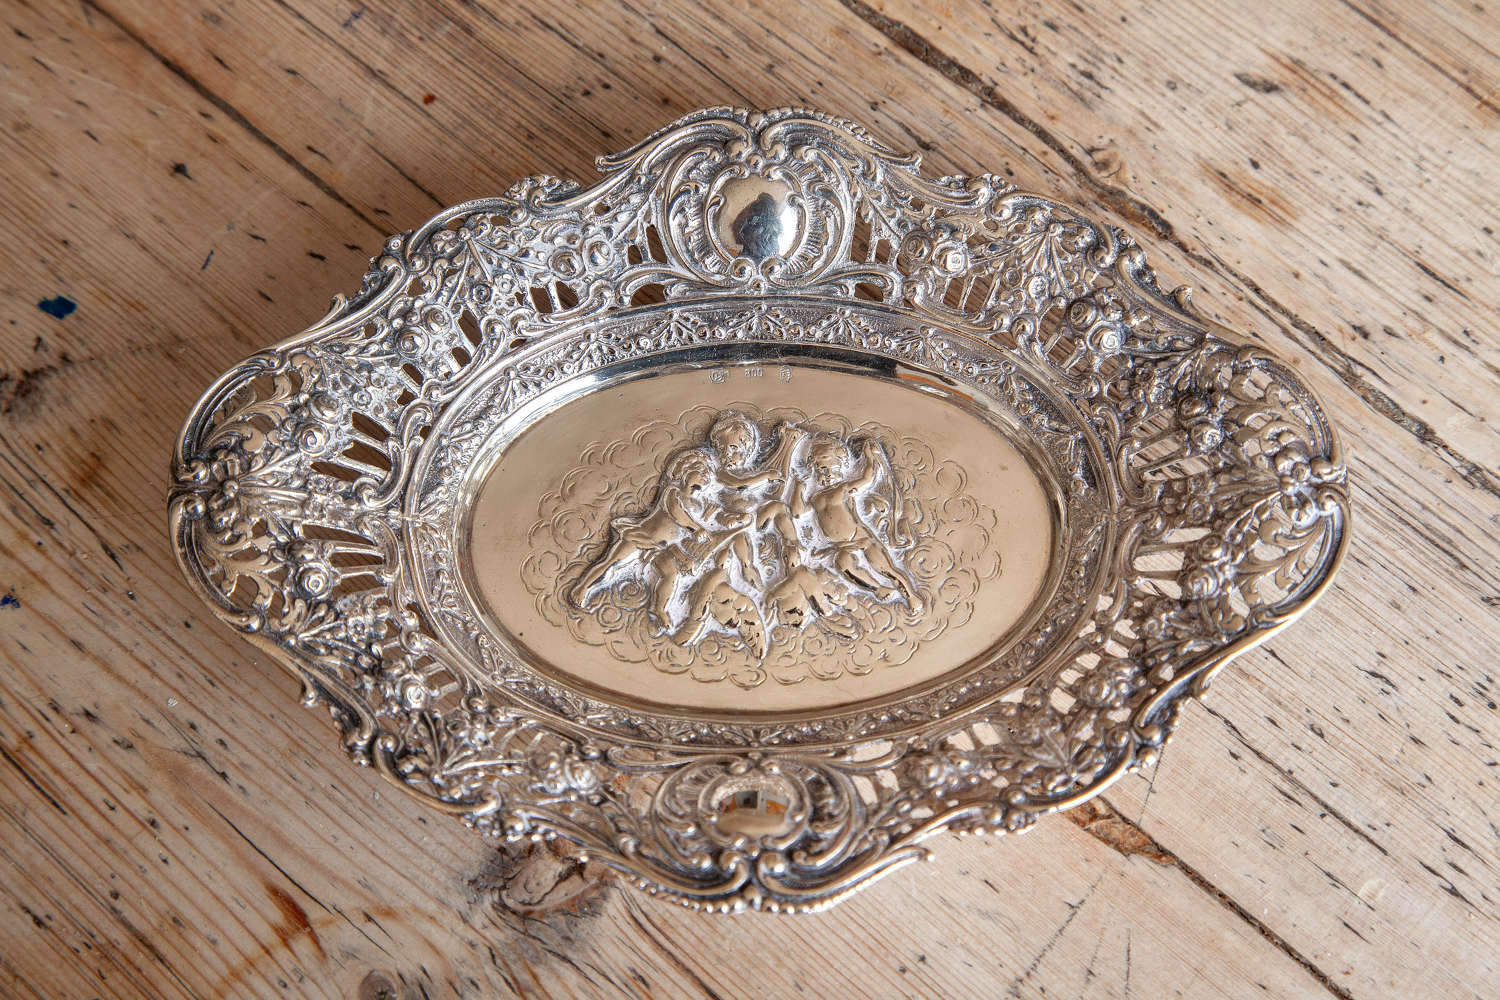 German Silver Tray decorated with Cherubs